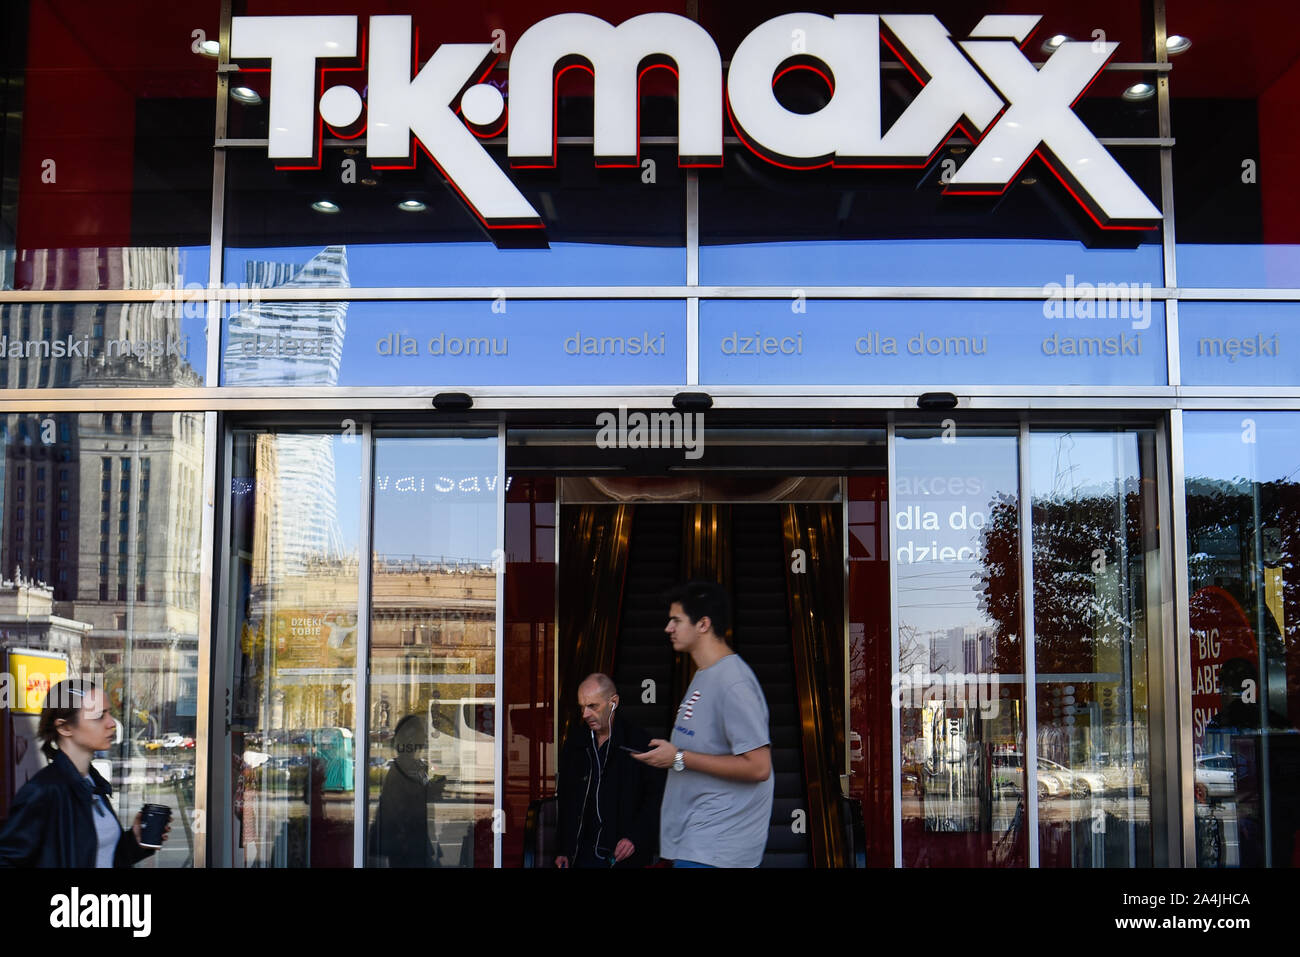 TK Maxx Relaunches Footwear Department in Charing Cross Store